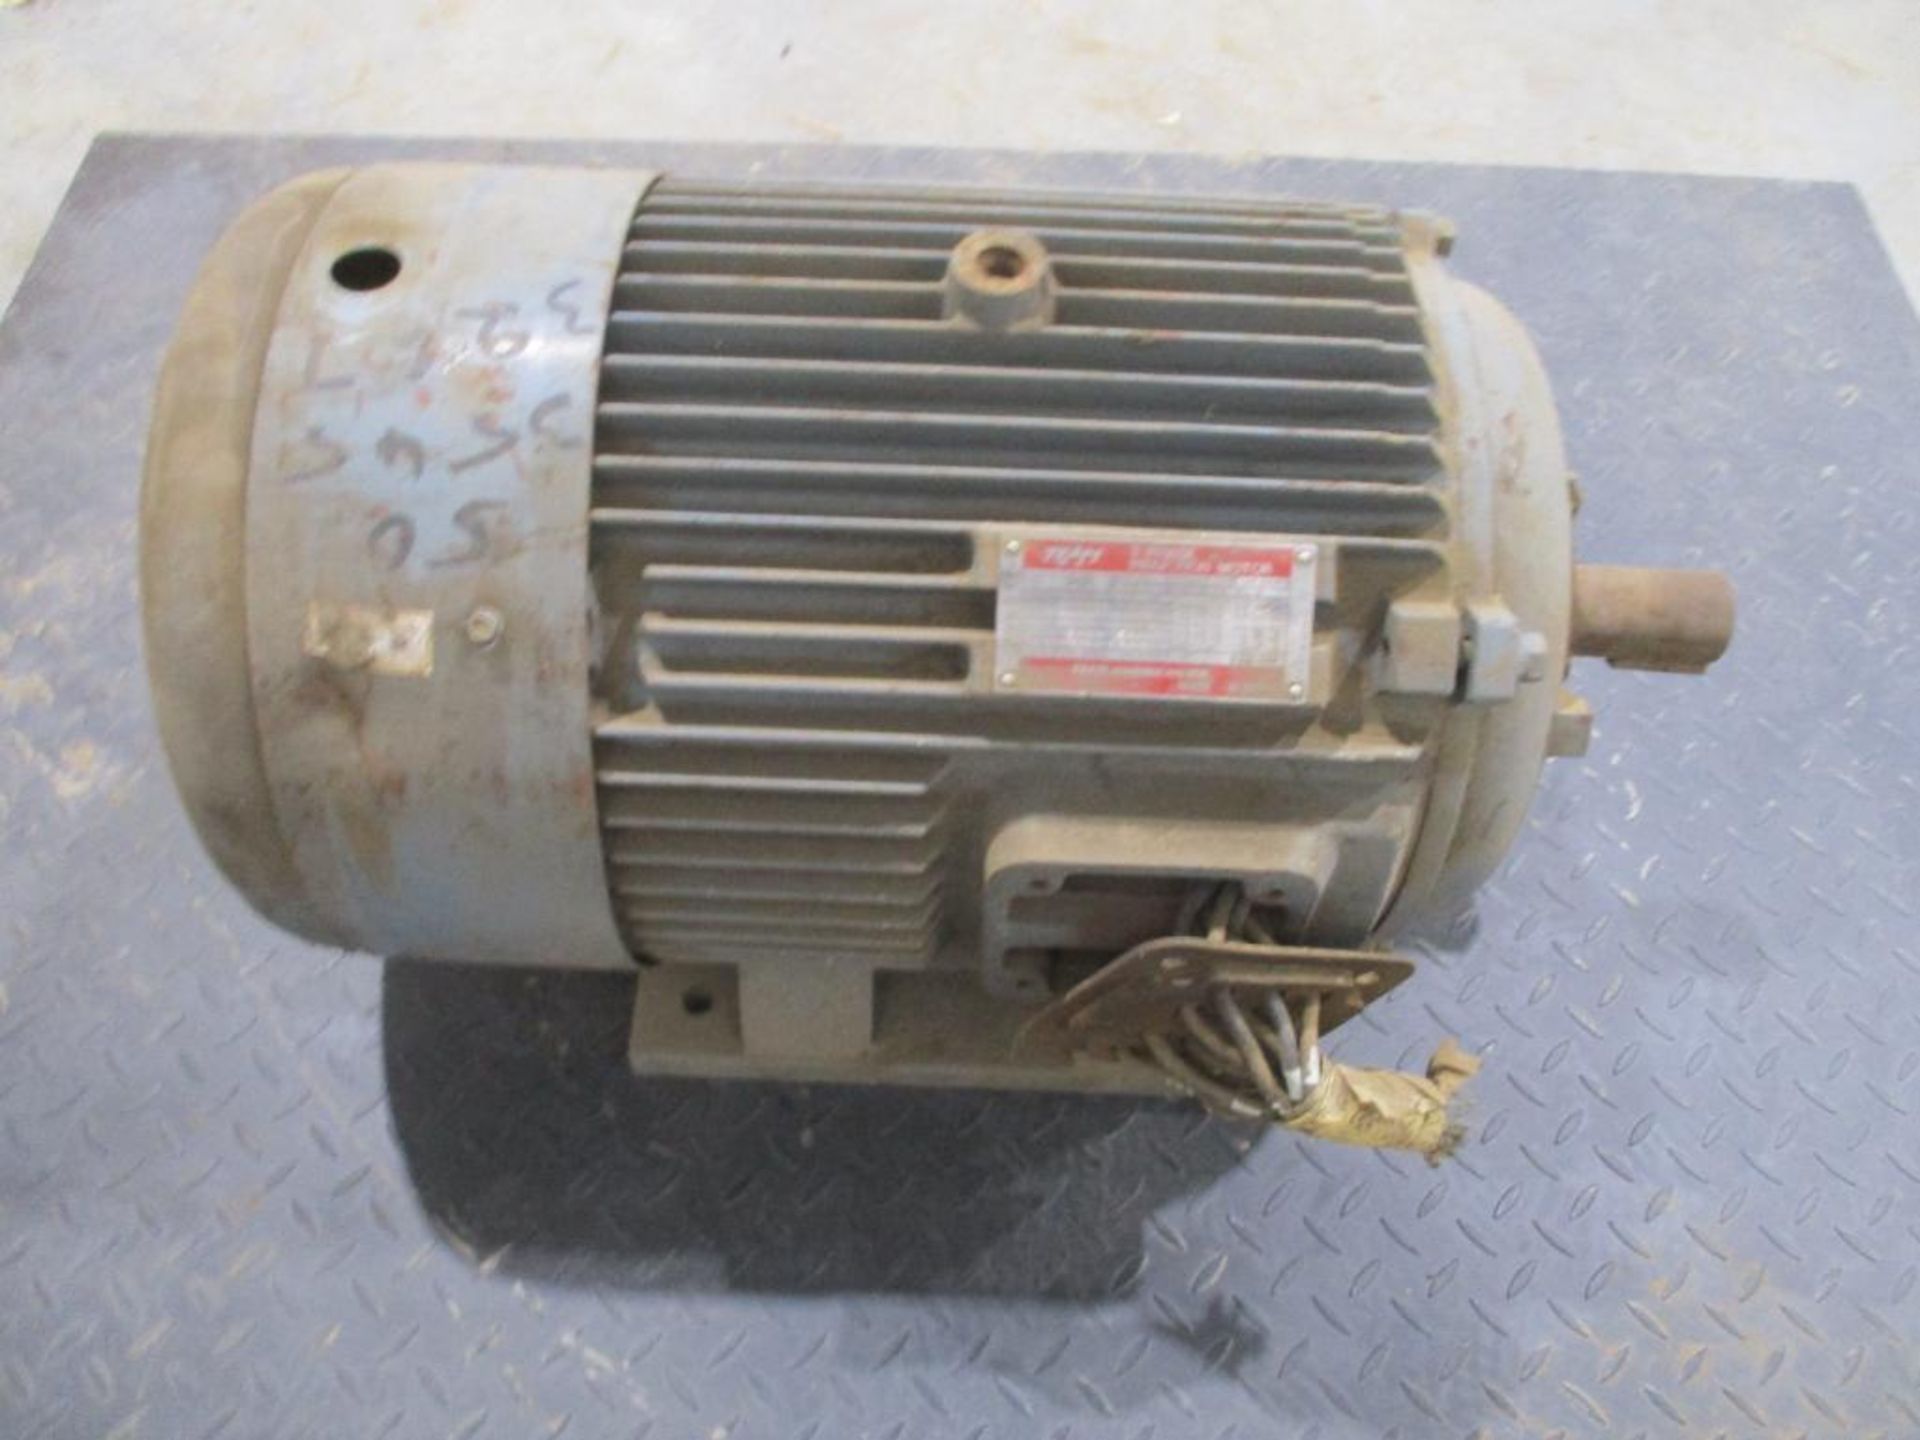 TECO AMERICA 3 PHASE 50HP 3545RPM 326TS FRAME A/C MOTOR P/N 6030001, 538# lbs (There will be a $40 R - Image 3 of 5